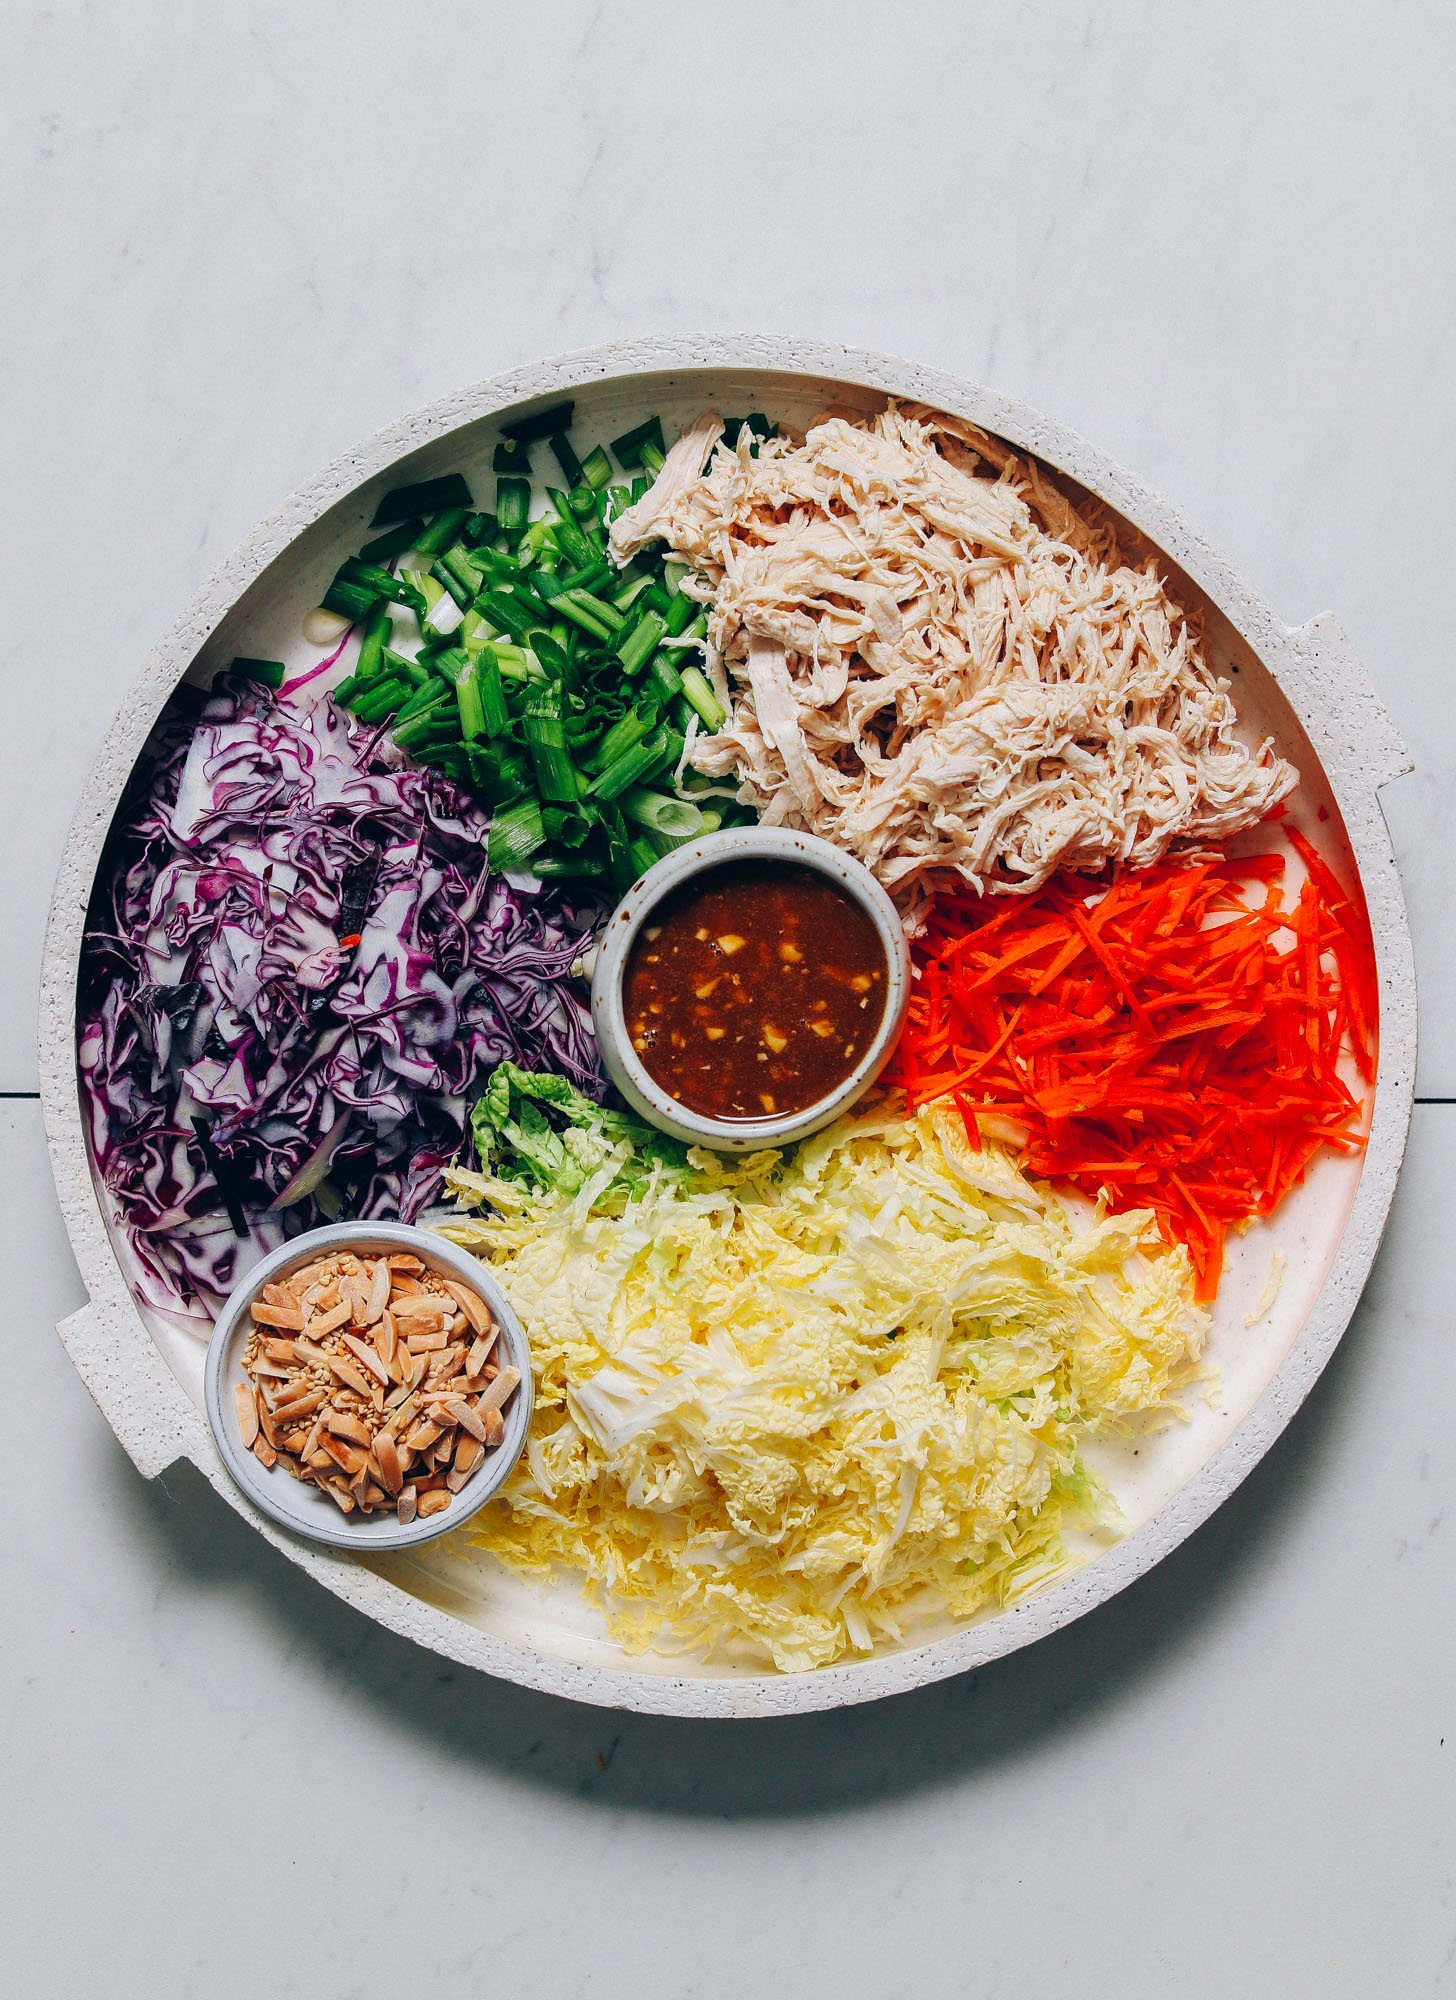 Tray filled with fresh vegetables and chicken for making our easy Crunchy Cabbage Slaw with Sesame Ginger Dressing